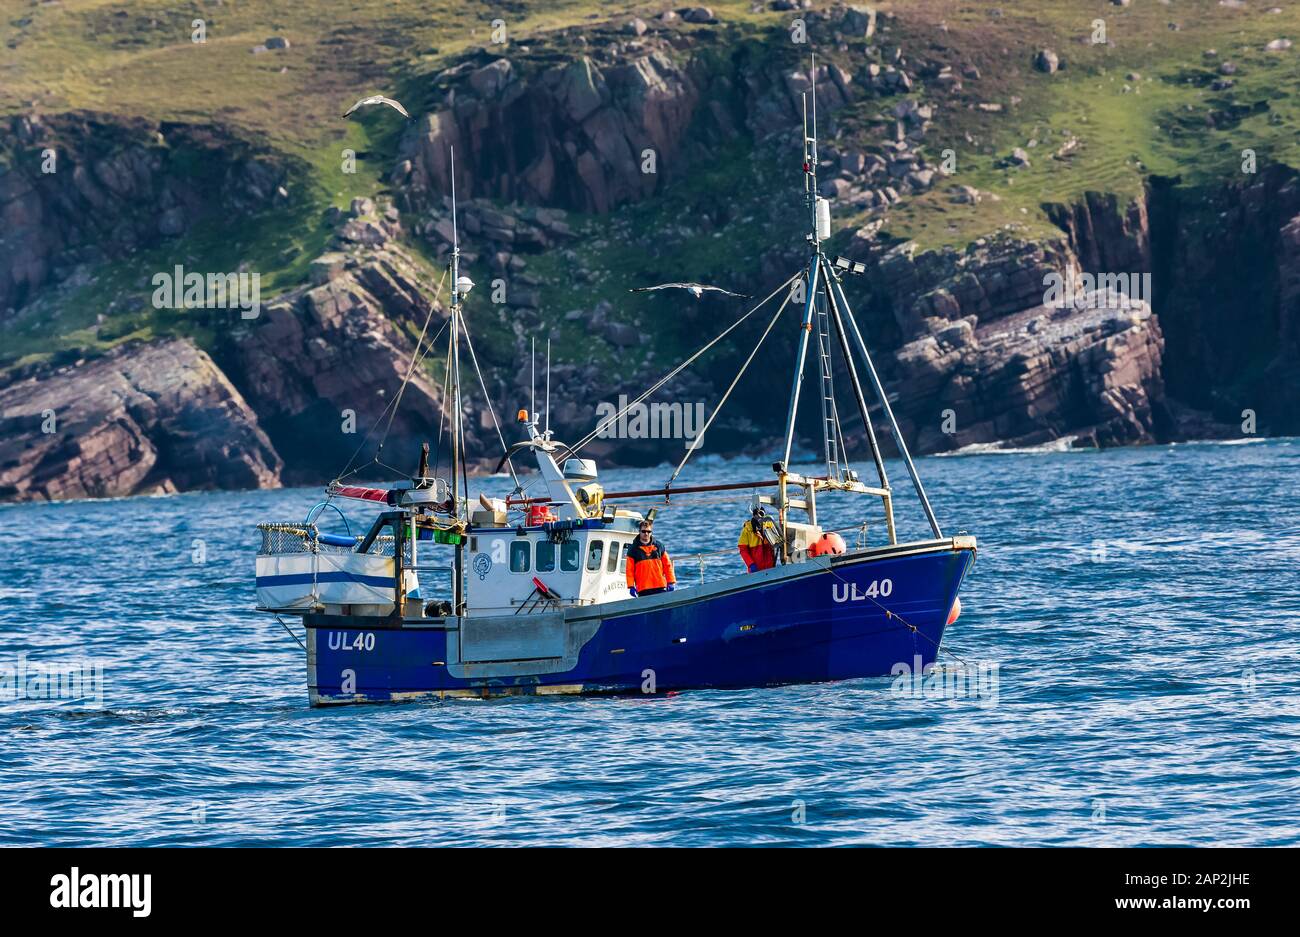 Fishing trawler and two fishermen fishing off the coastline of Ullapool in the Highlands of Scotlands, pre-Brexit.  Horizontal.  Space for copy. Stock Photo